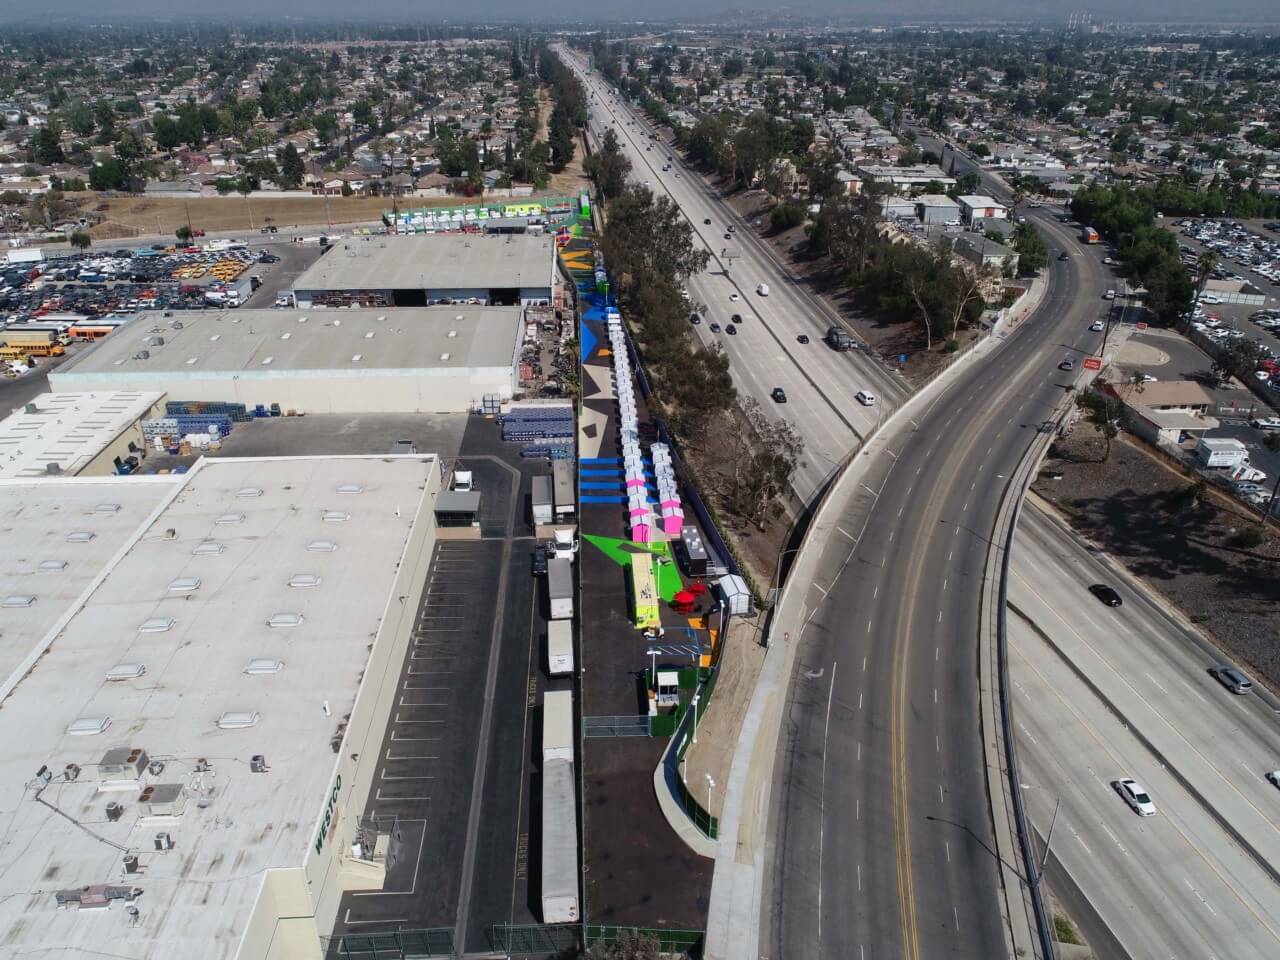 a brightly colored tiny house community located alongside a freeway